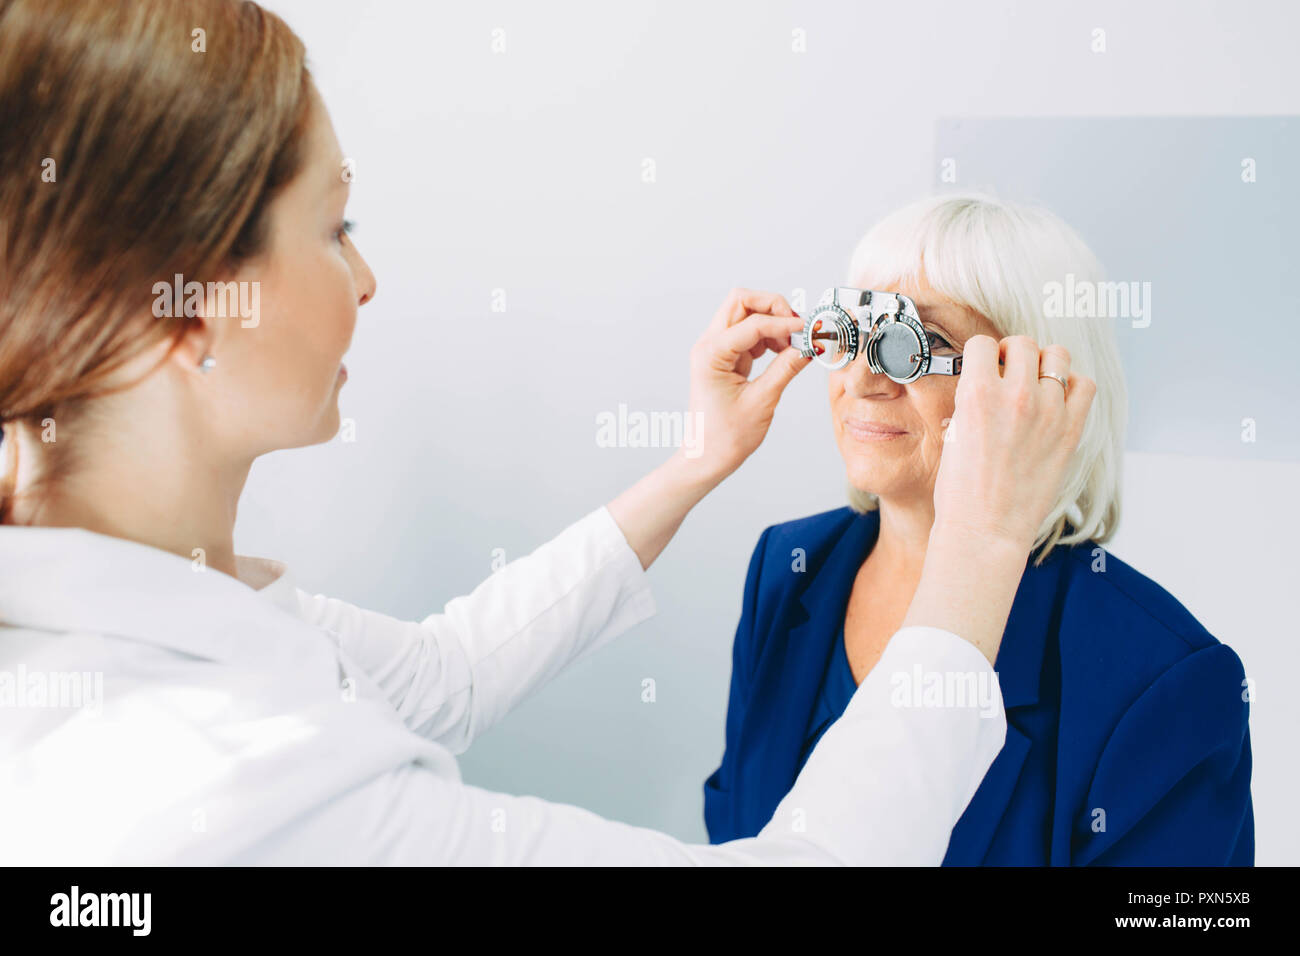 Optician doctor examining old woman's eye, using a trial frame Stock Photo